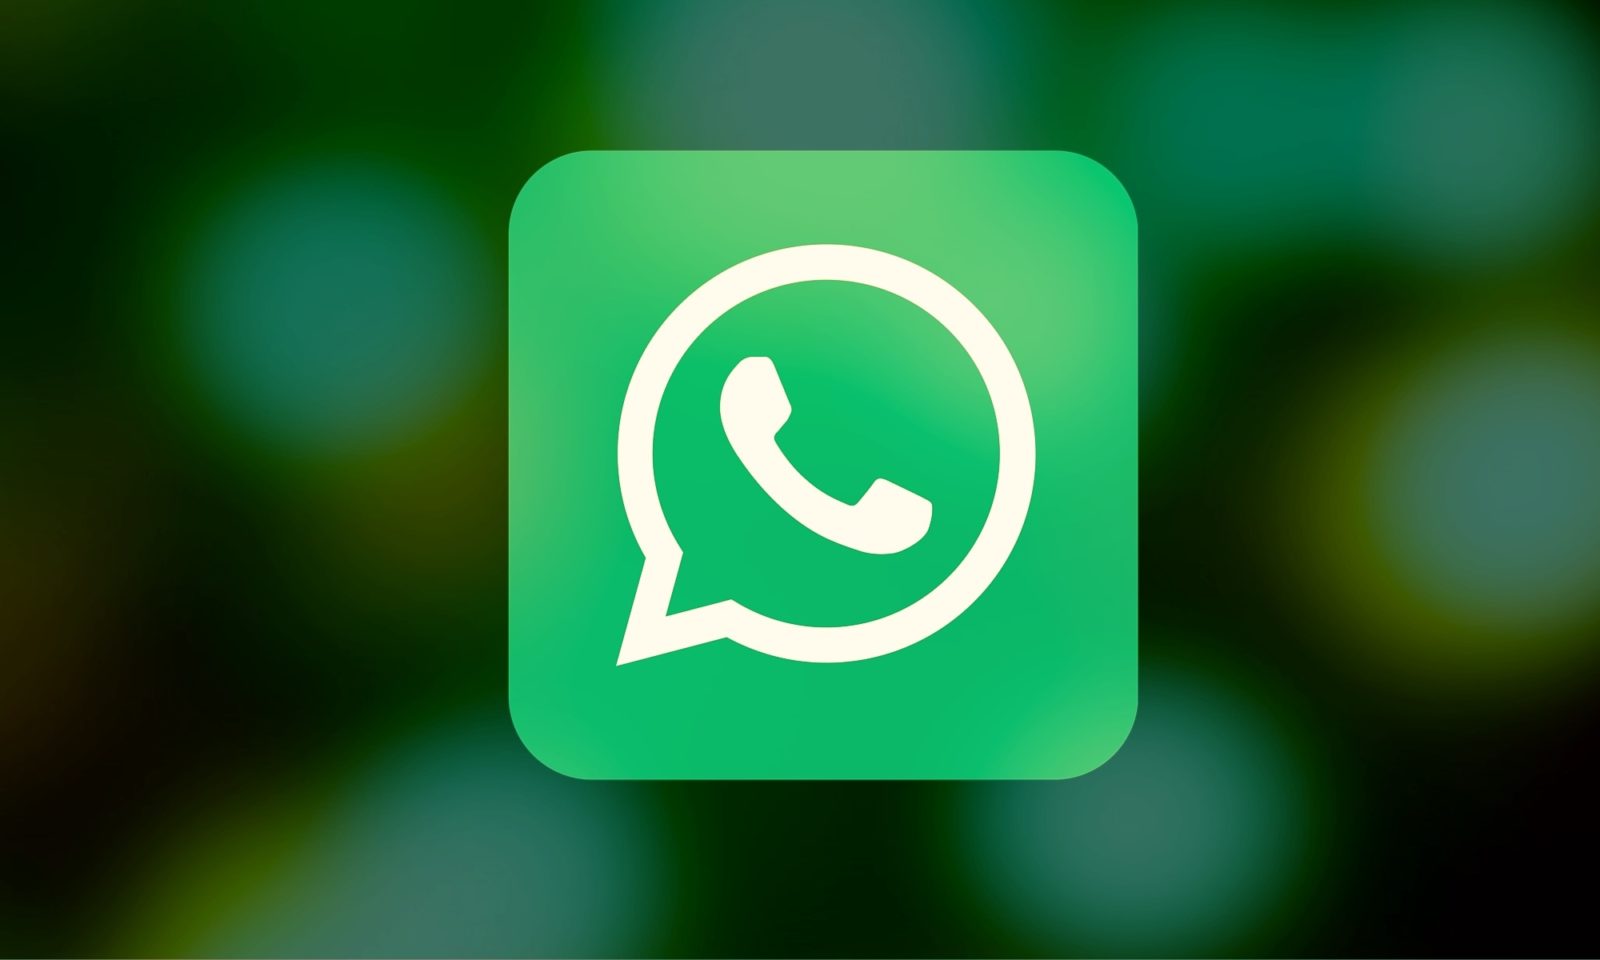 WhatsApp makes your conversations safer than ever before